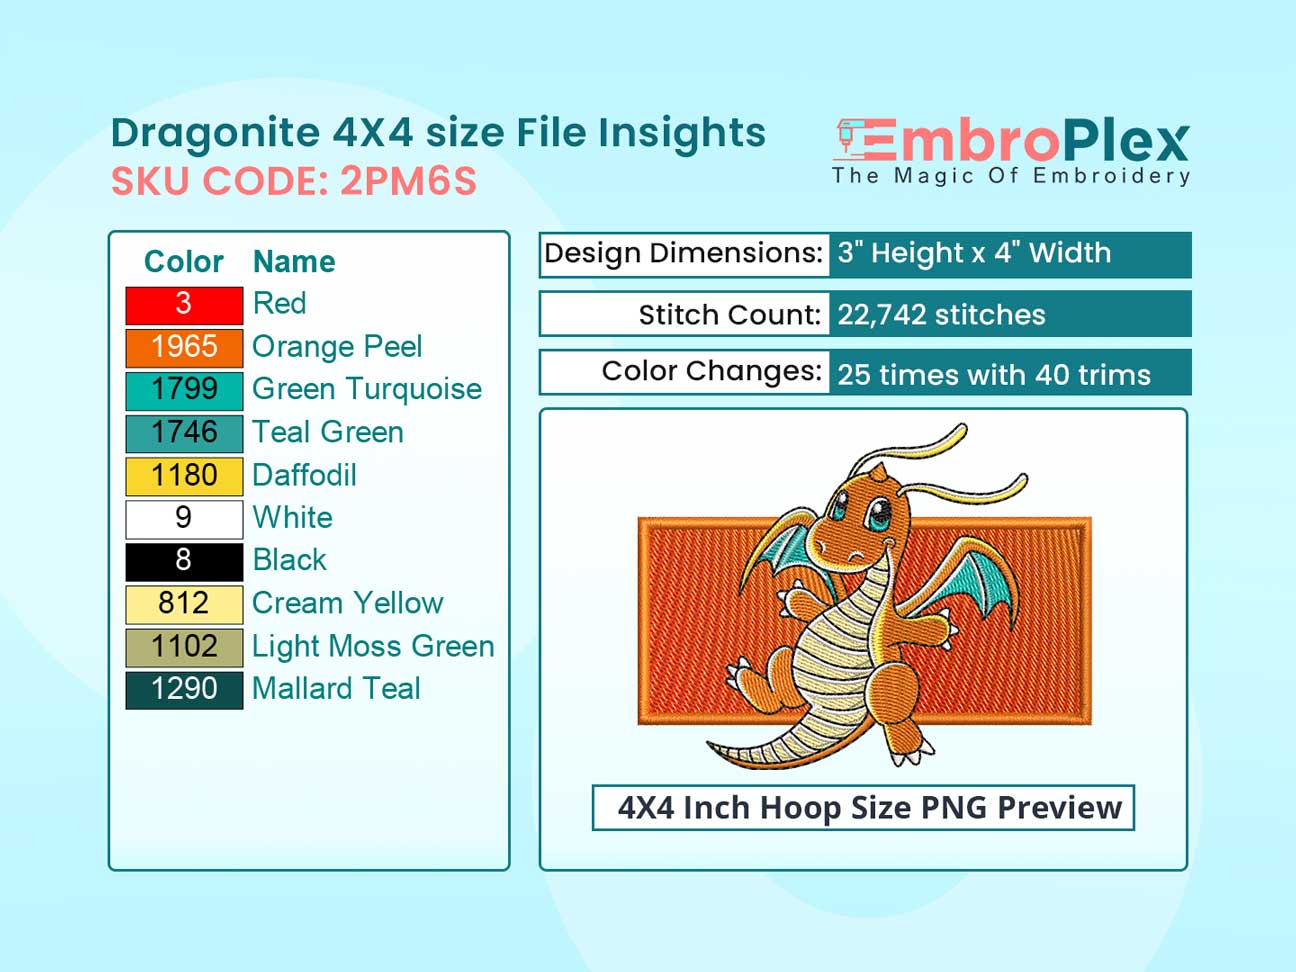 Anime-Inspired Dragonite Embroidery Design File - 4x4 Inch hoop Size Variation overview image